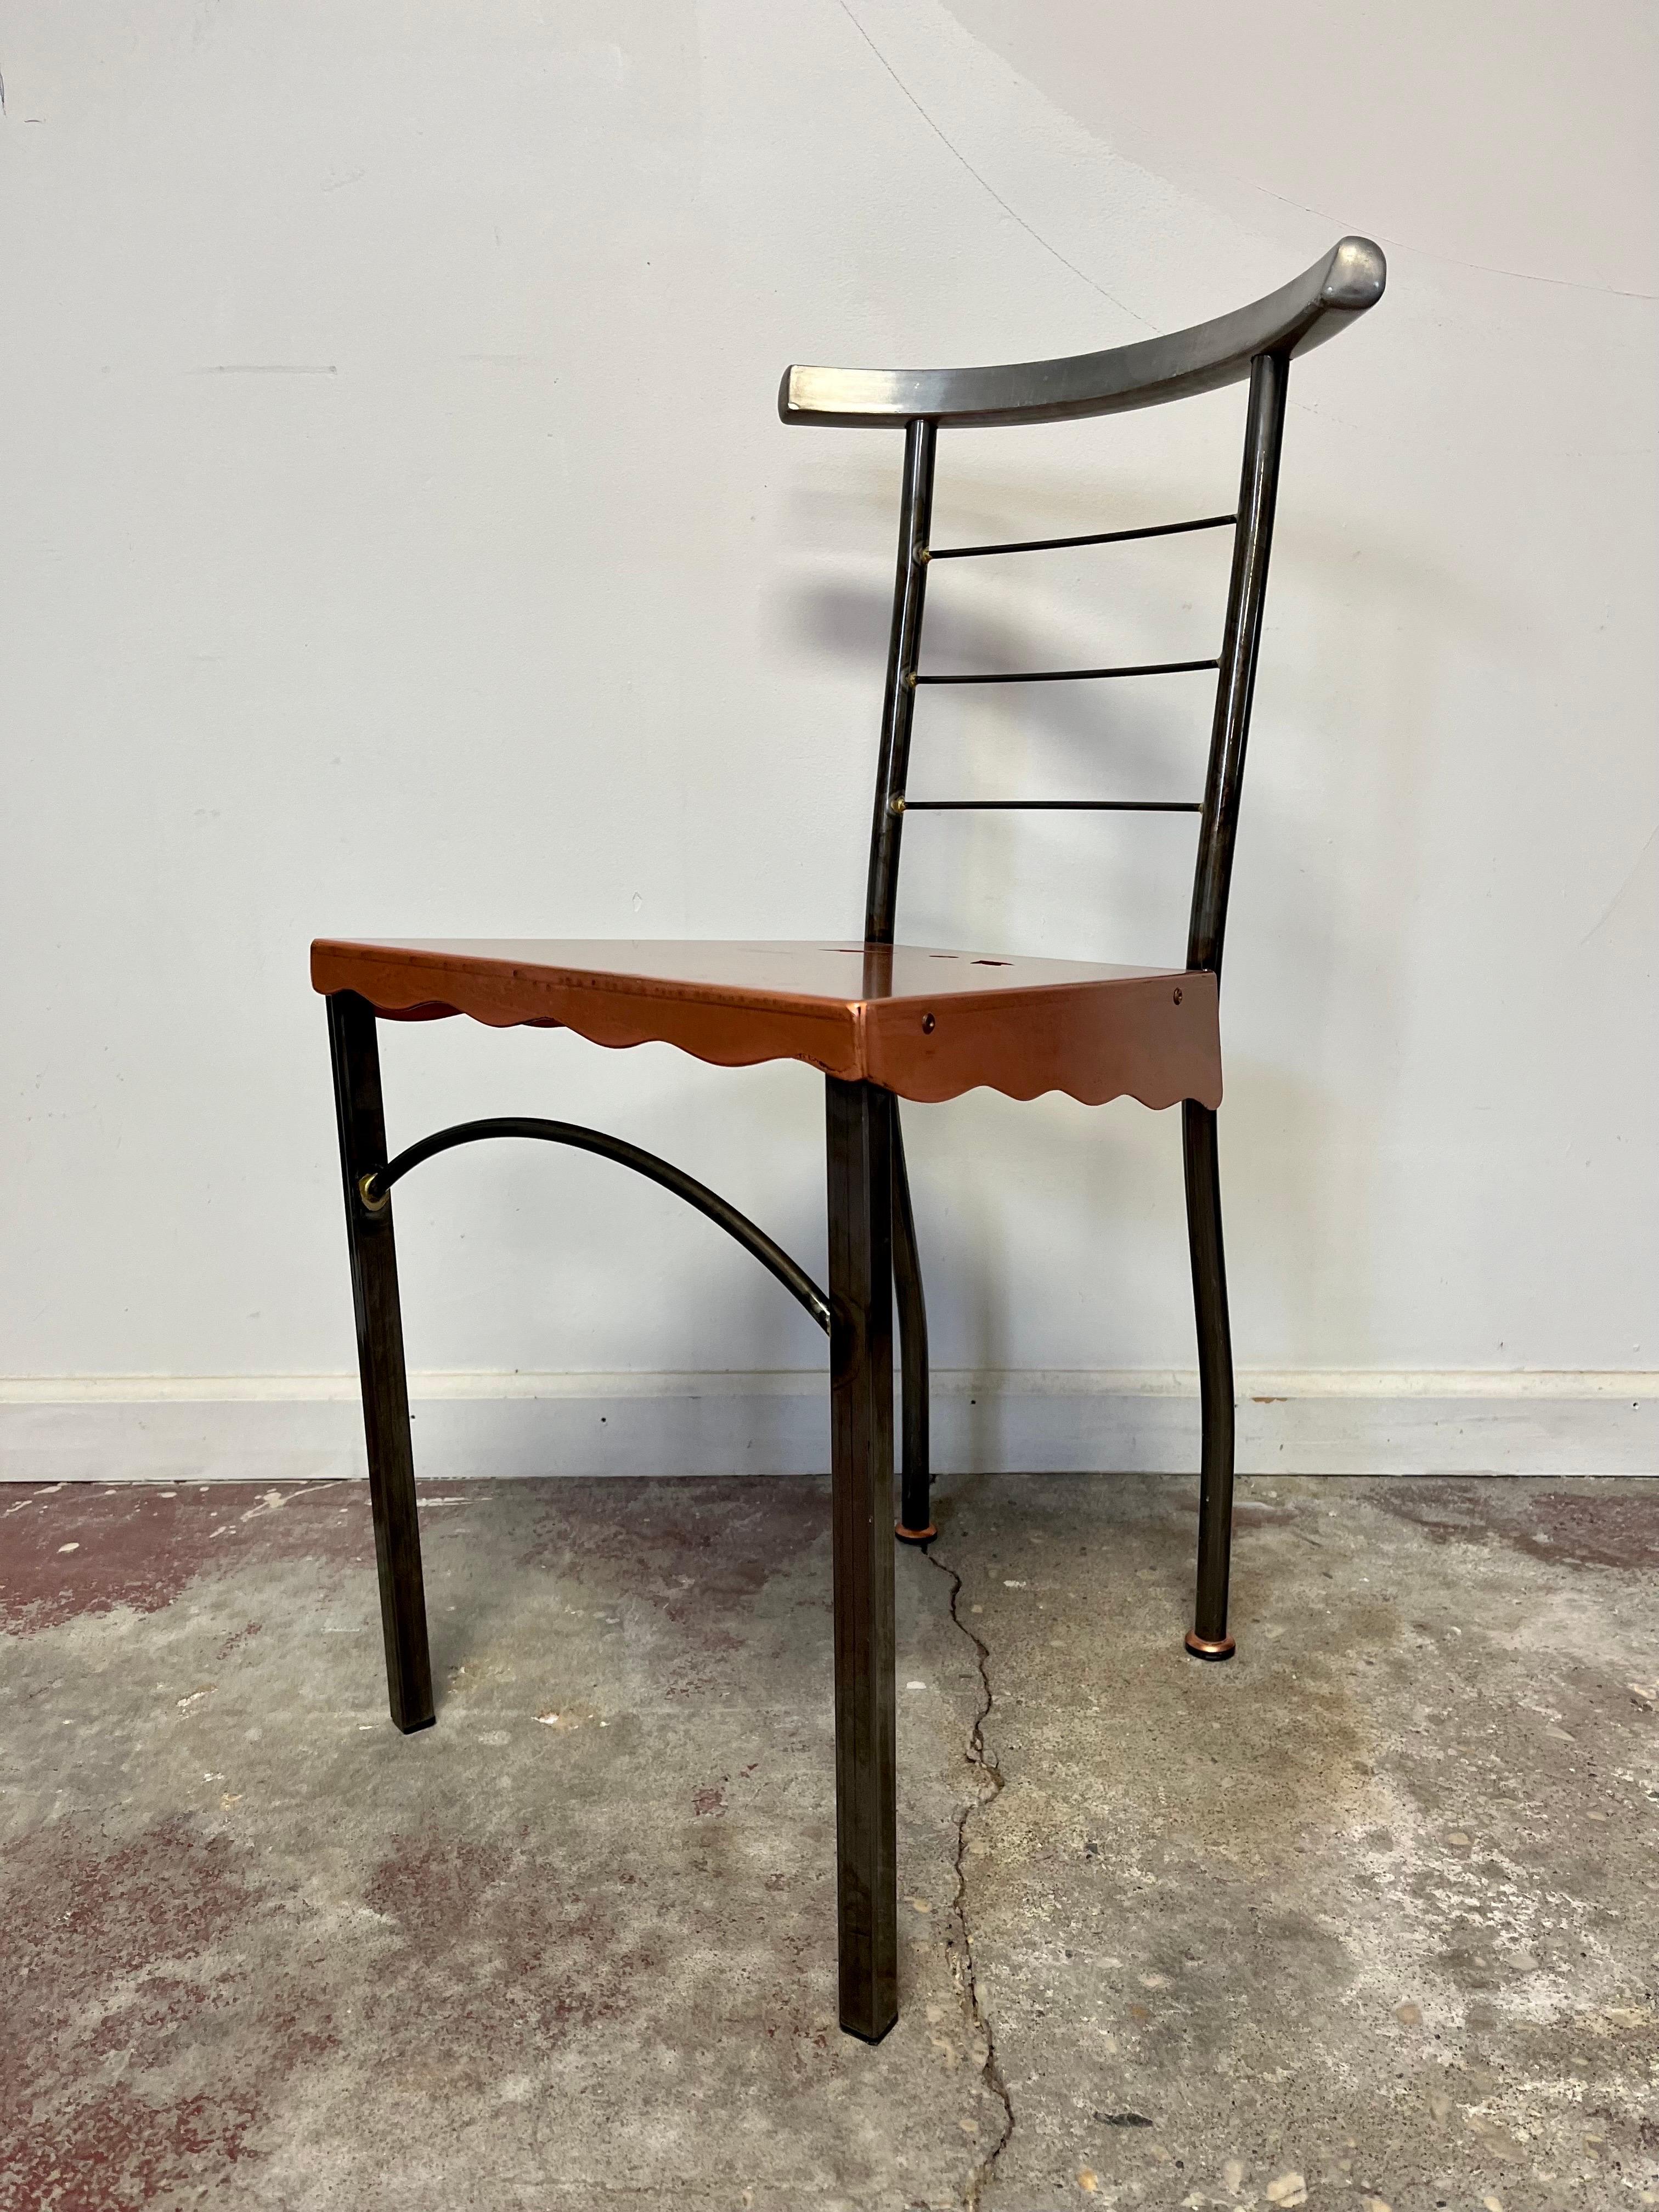 Great mixed metal side chair from Bloomingdale's. Whimsical design with draped seat which has leaf cutouts. Steel frame topped with curved aluminum back. Copper soldering along back rungs. So unique.
Curbside delivery to NYC/Philly $300